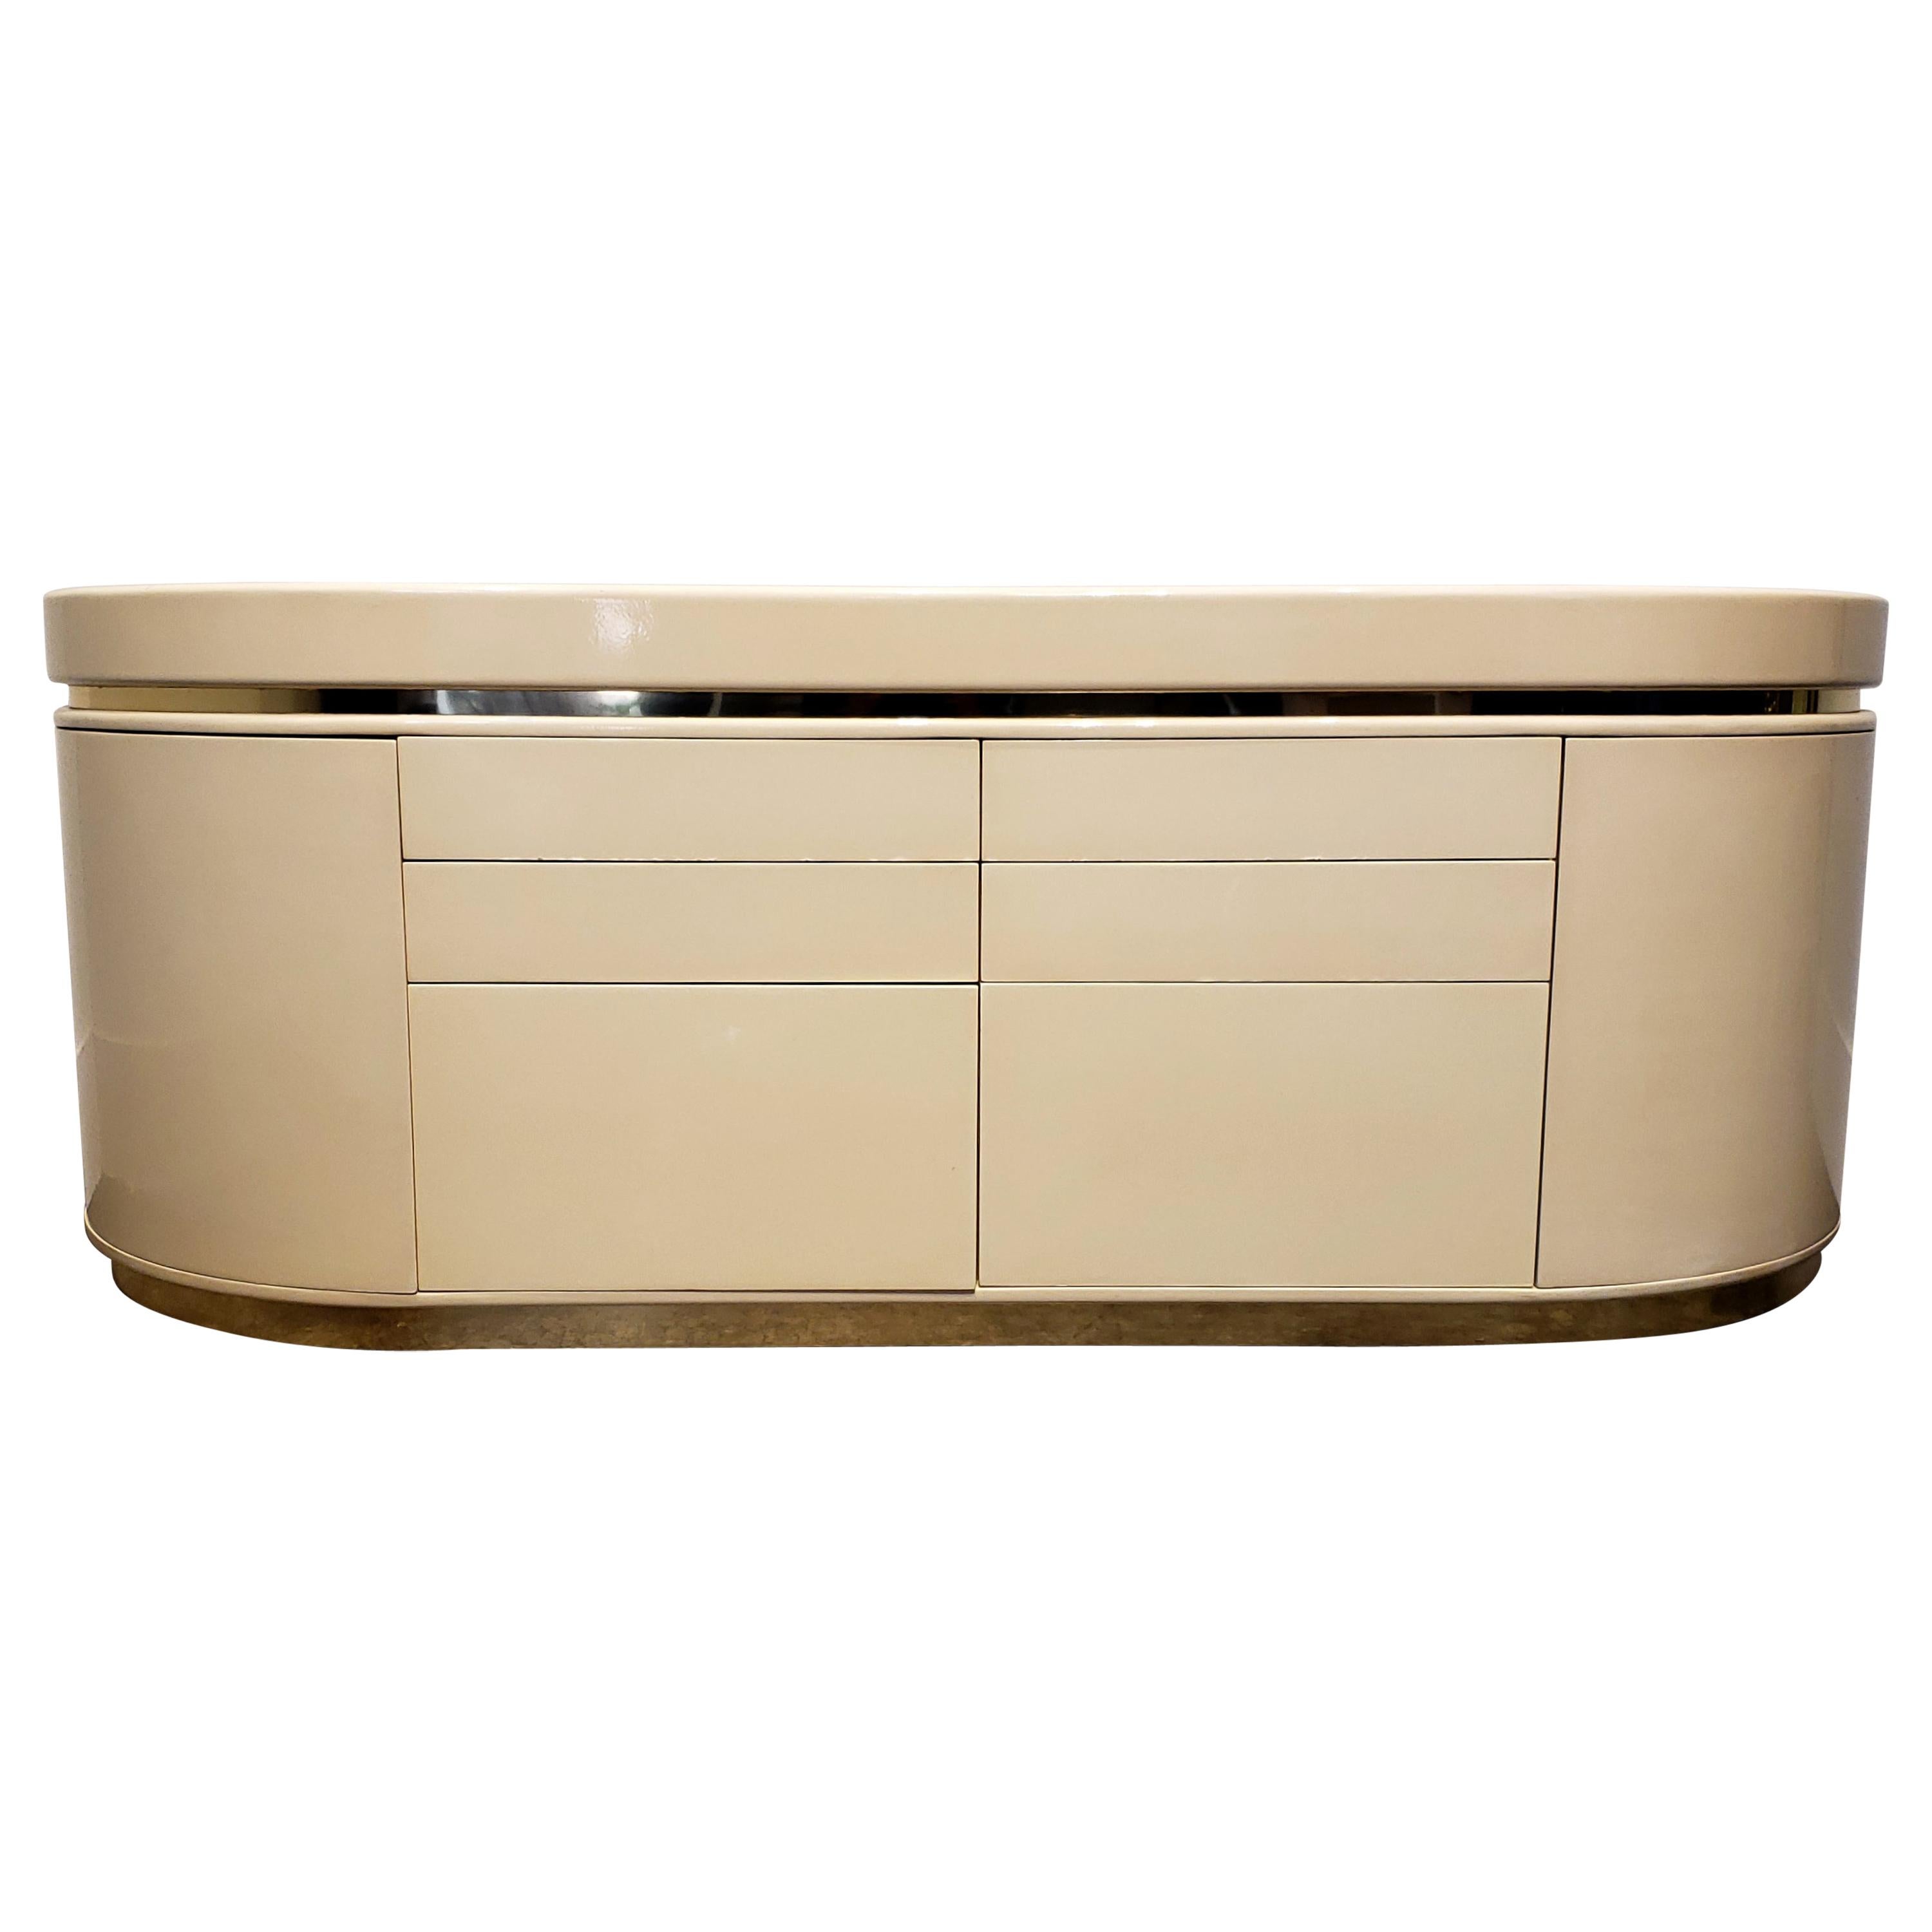 Large Curved Lacquered Off-White Cream Credenza by J. Wade Beam, circa 1980